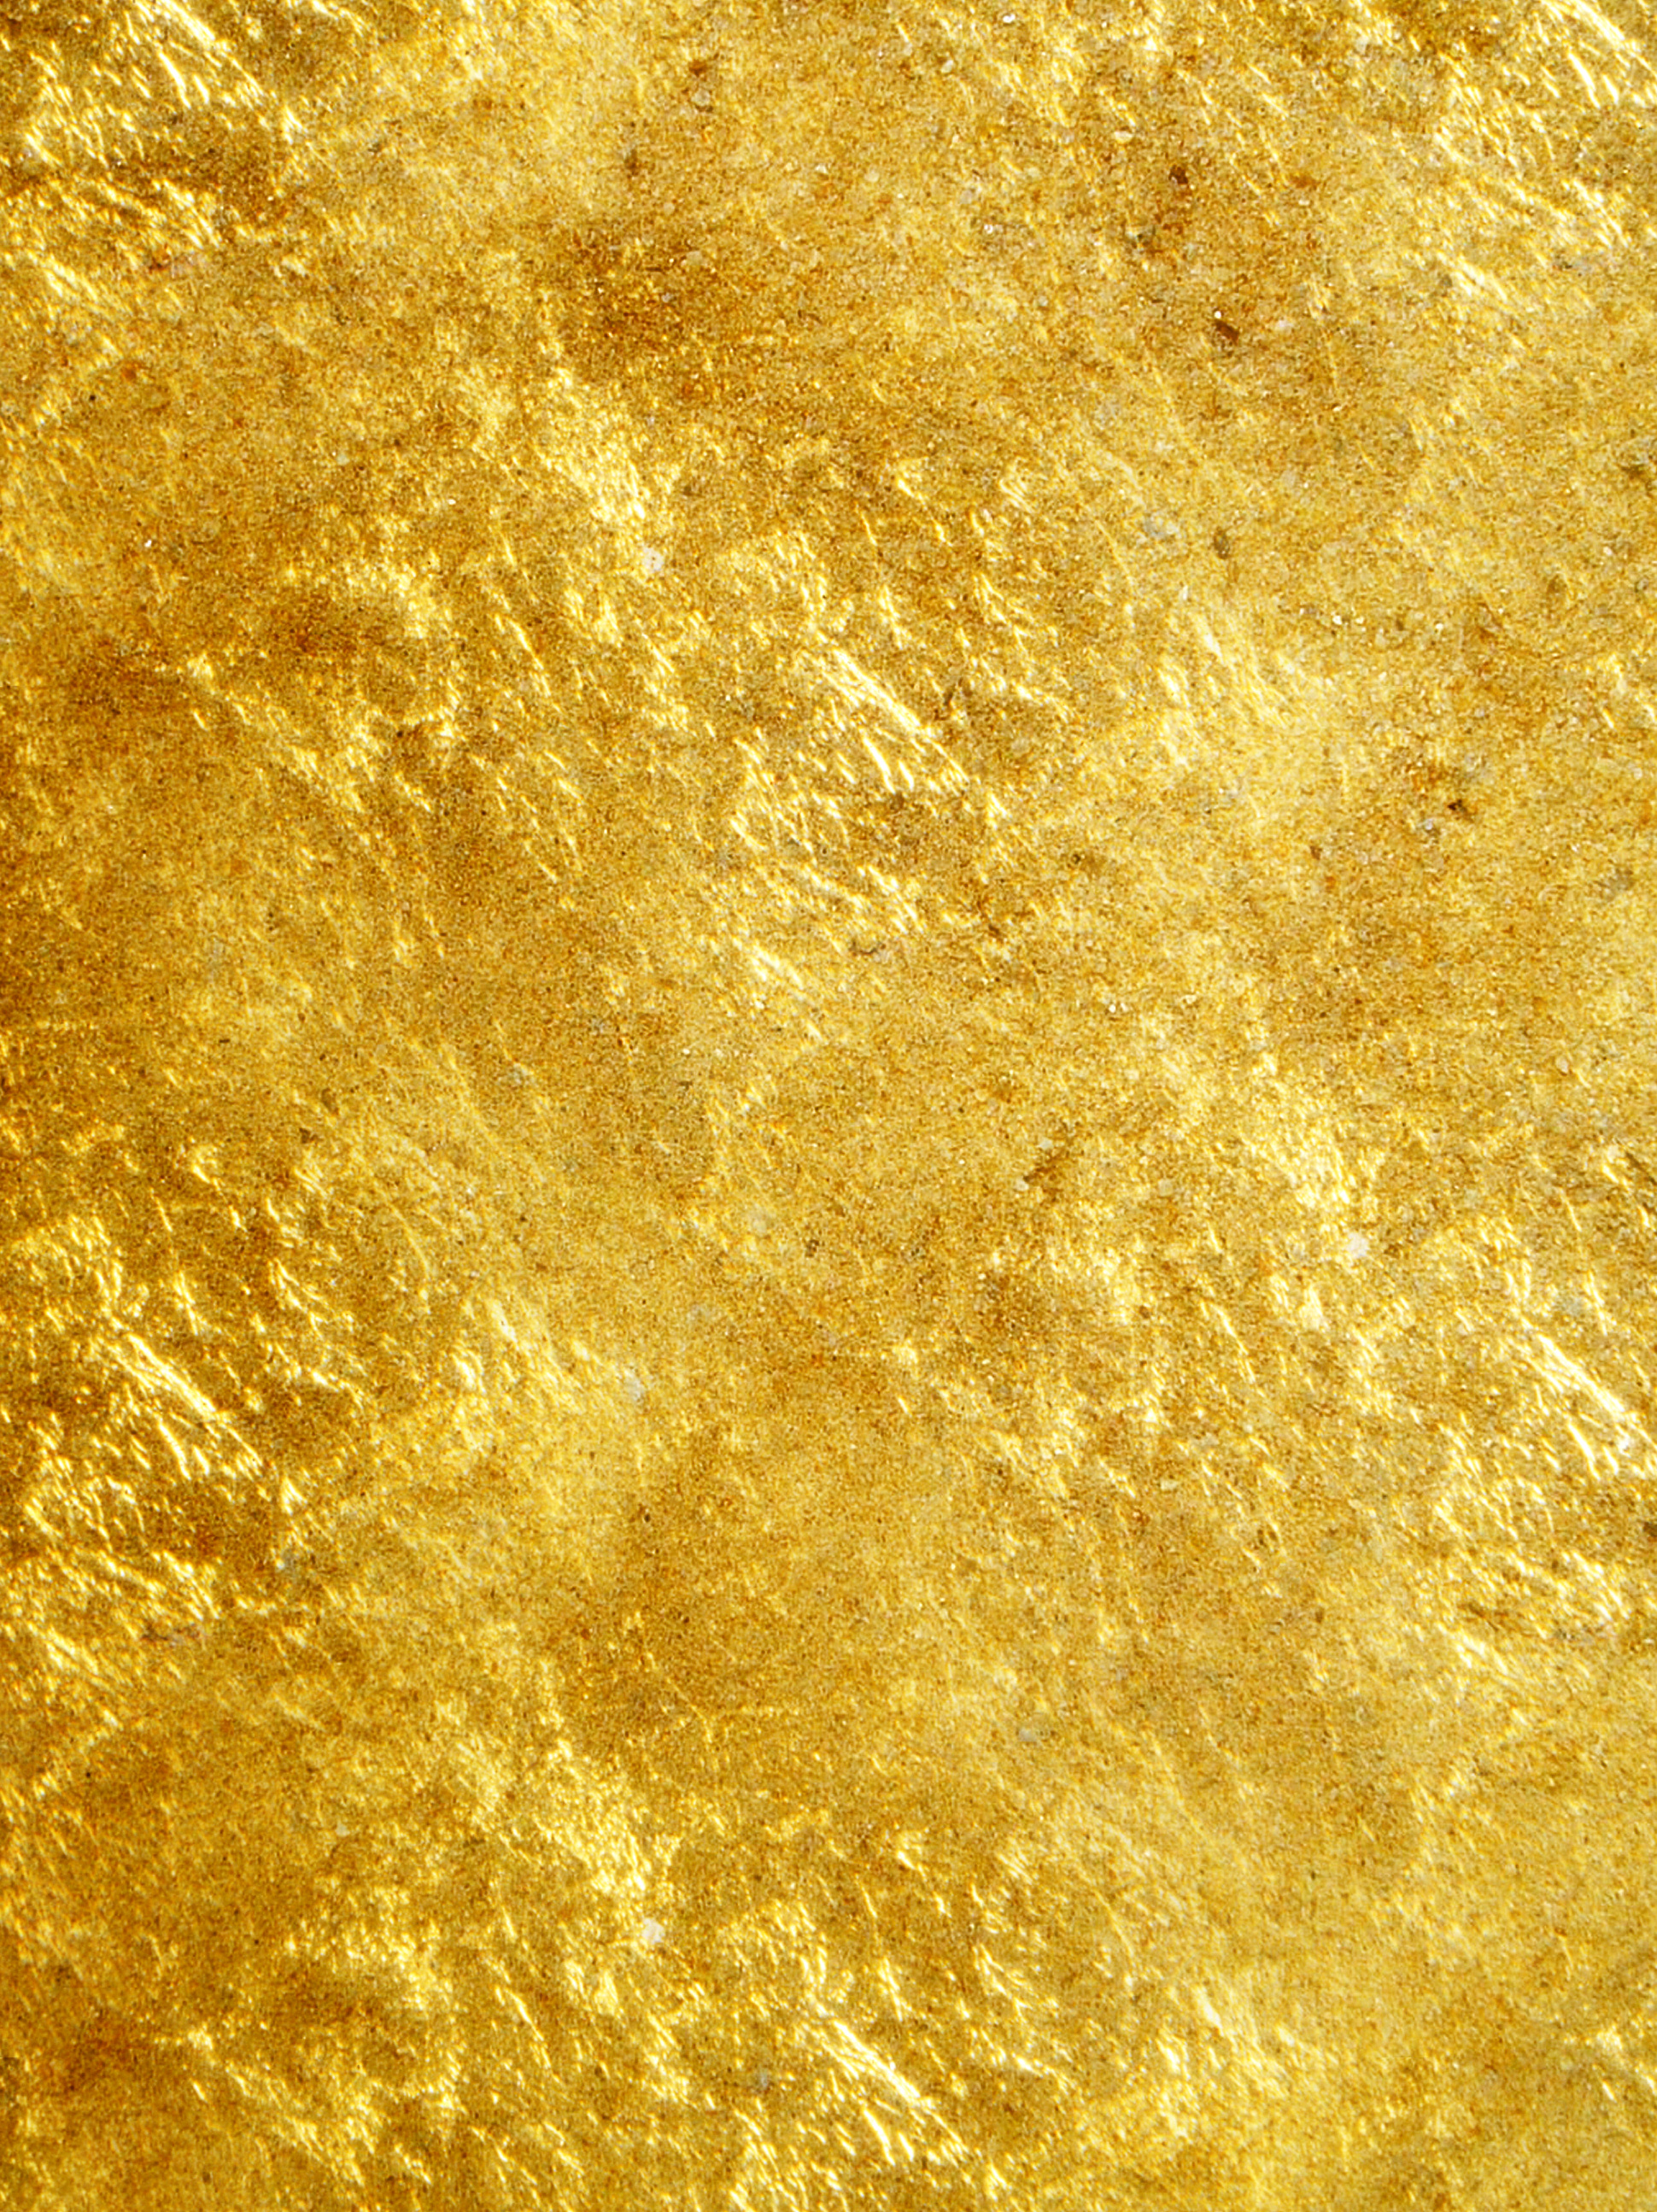 gold paper chemical elements